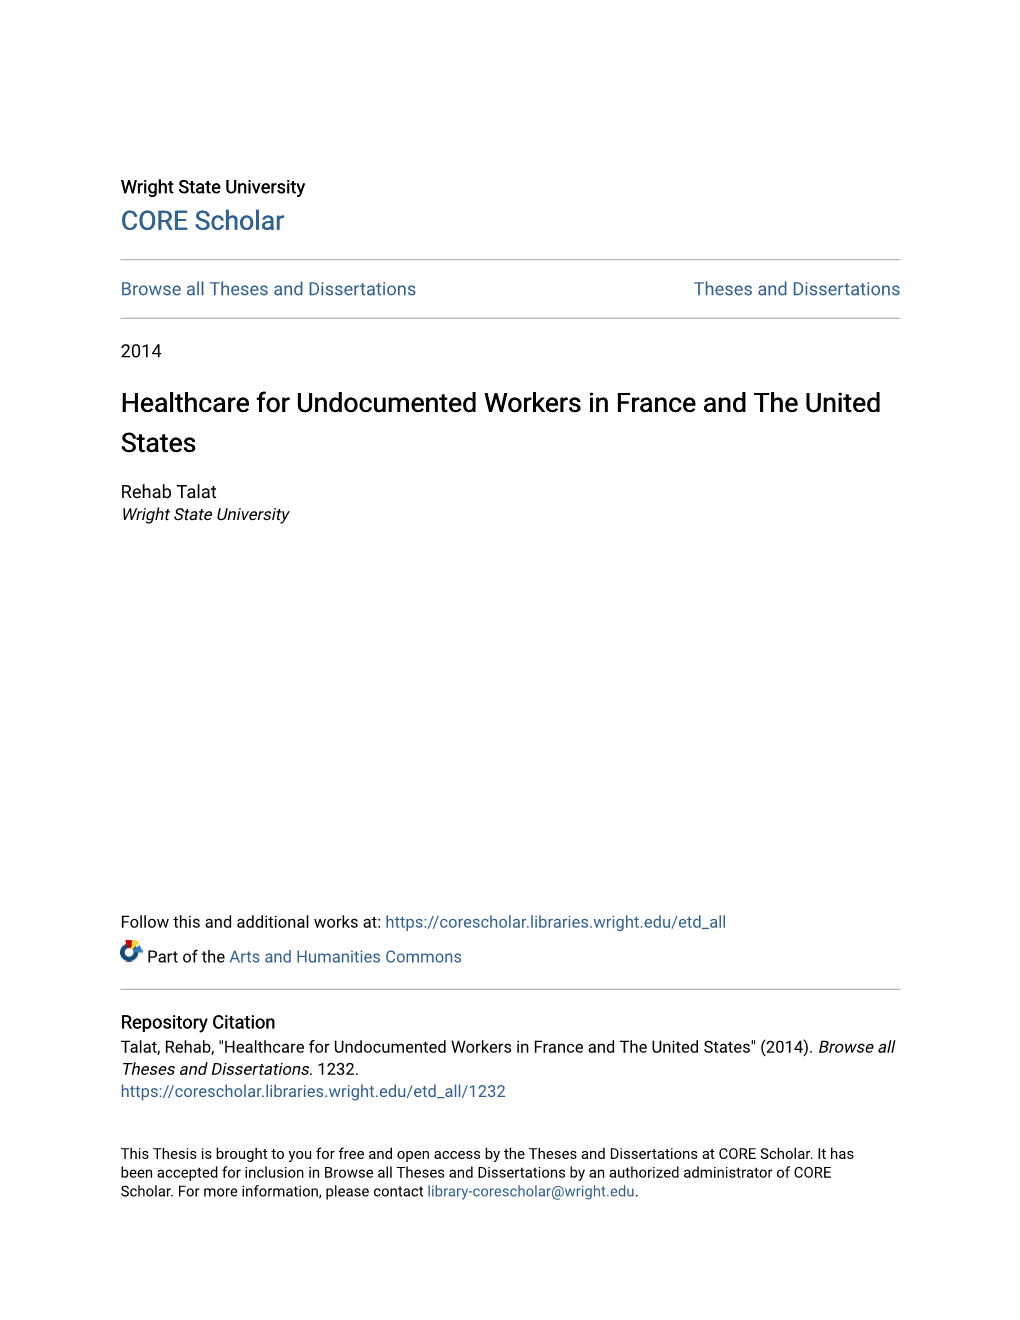 Healthcare for Undocumented Workers in France and the United States